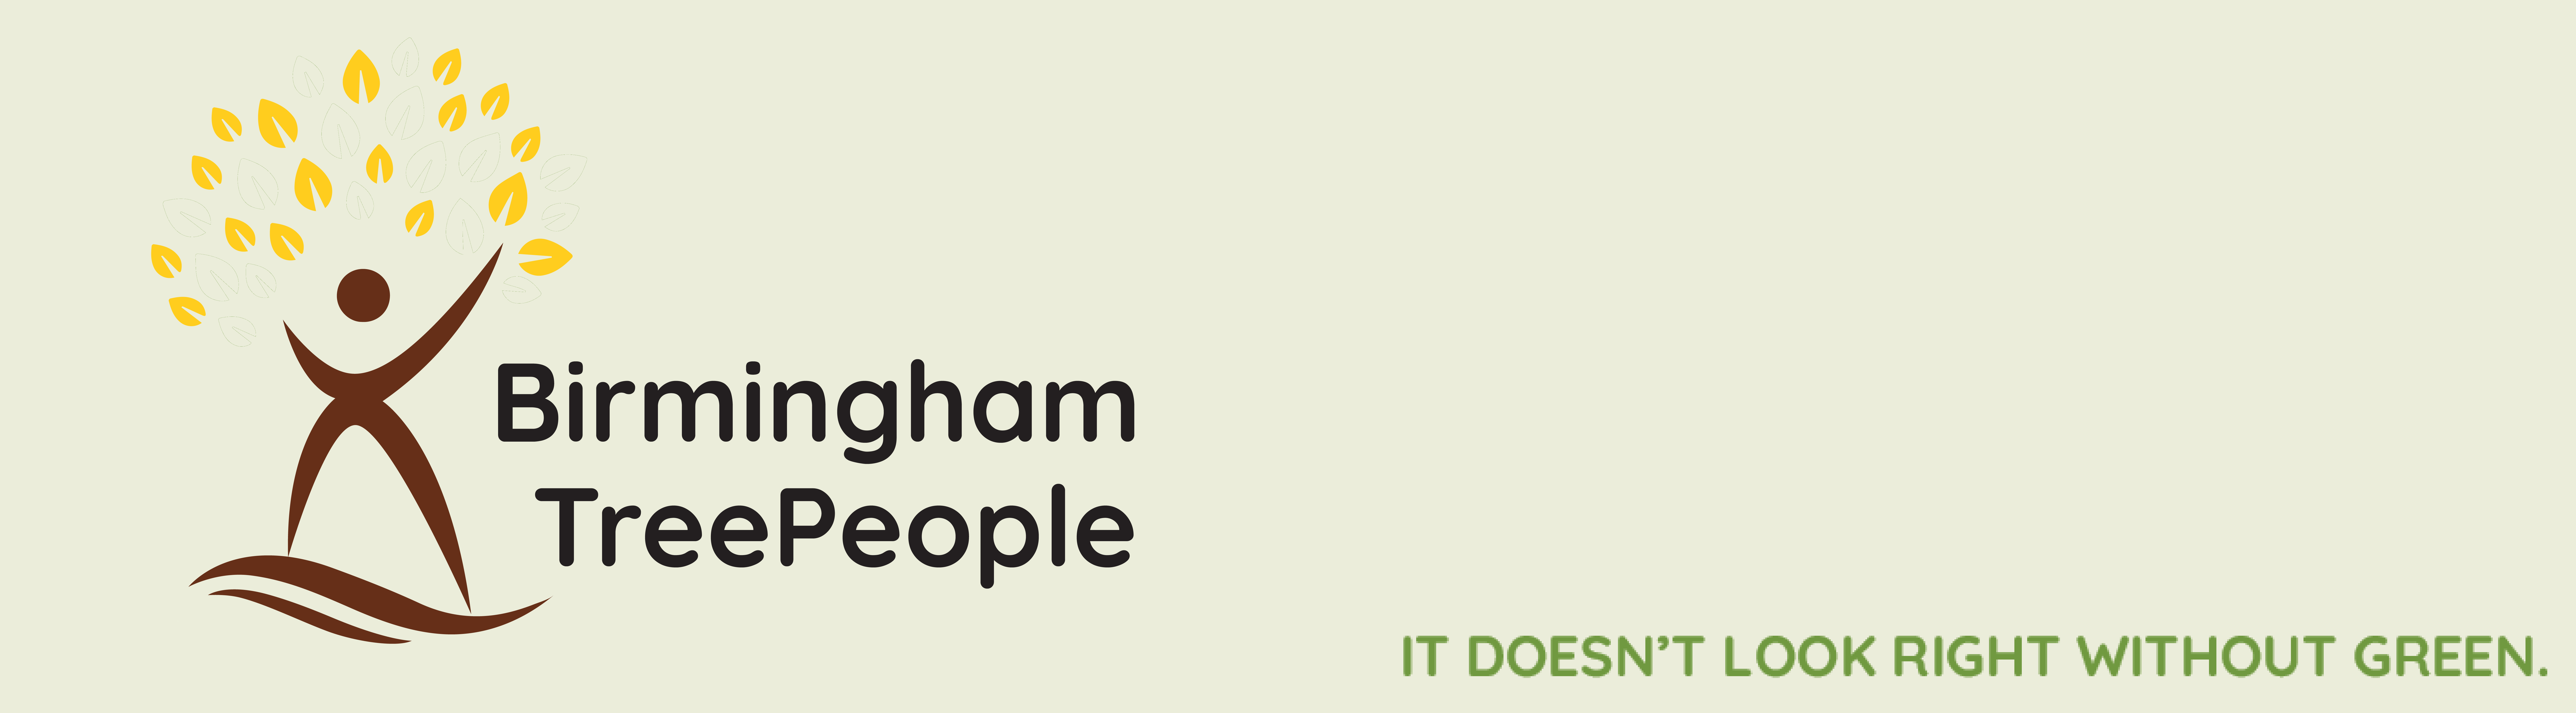 Birmingham TreePeople logo banner: IT DOESN'T LOOK RIGHT WITHOUT GREEN.